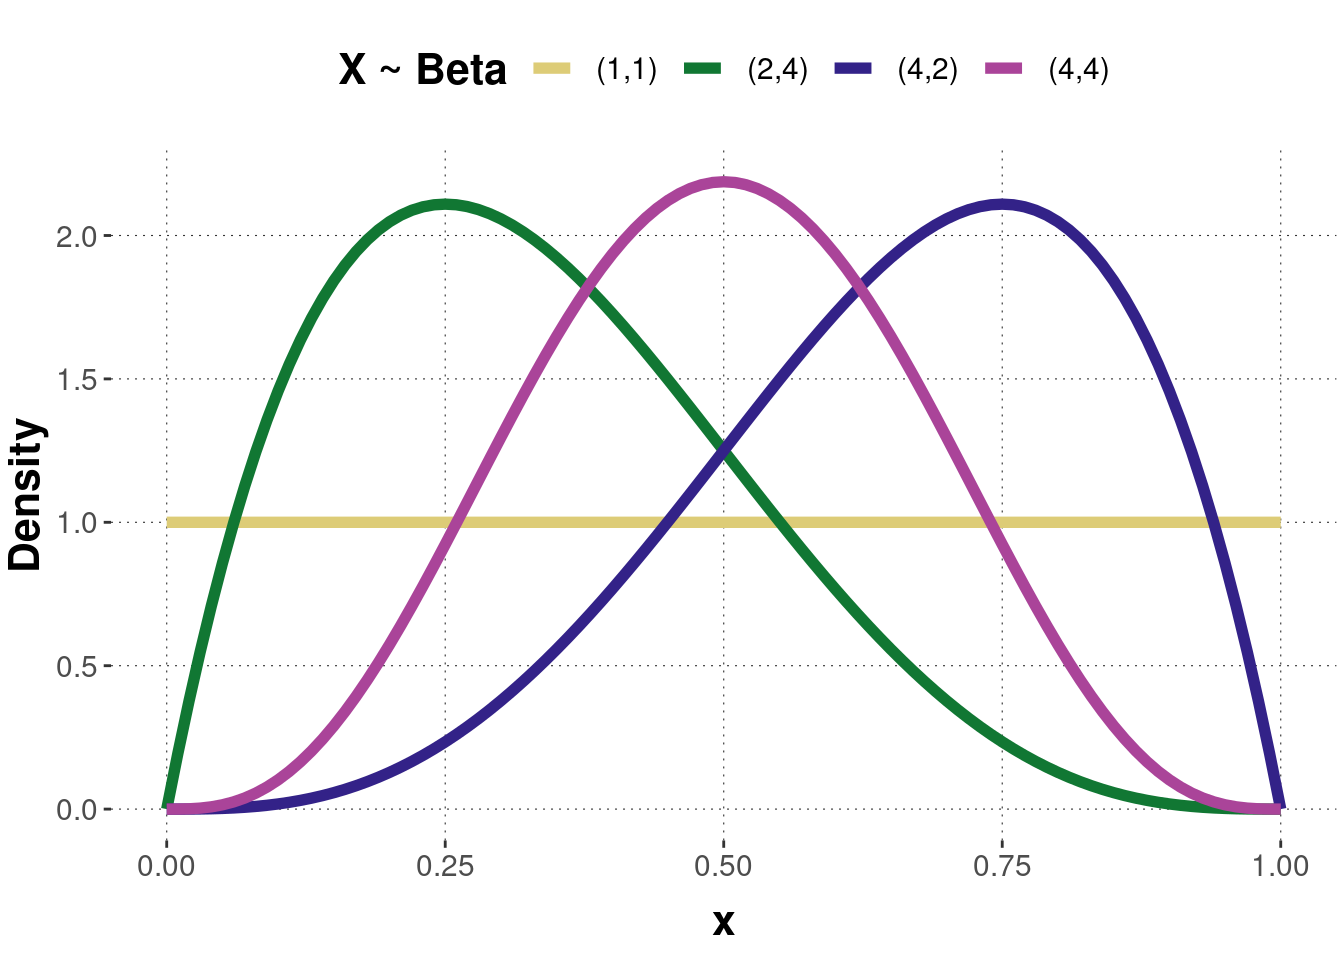 Examples of a probability density function of the beta distribution. Pairs of numbers in the legend represent parameters $(a, b)$.